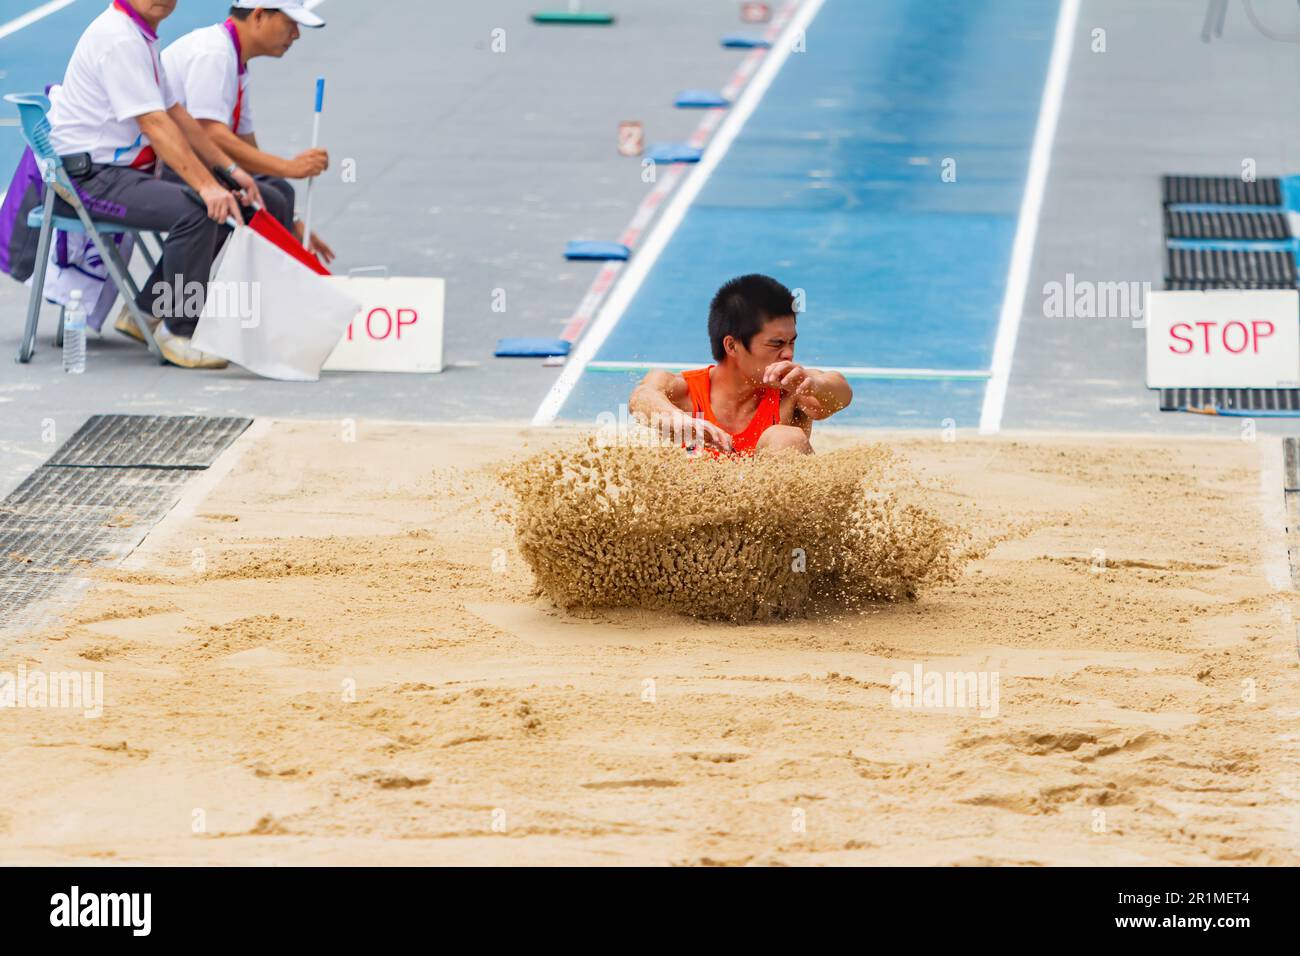 Taiwan, MAR 23 2013 - Long jump in The National Games Stock Photo